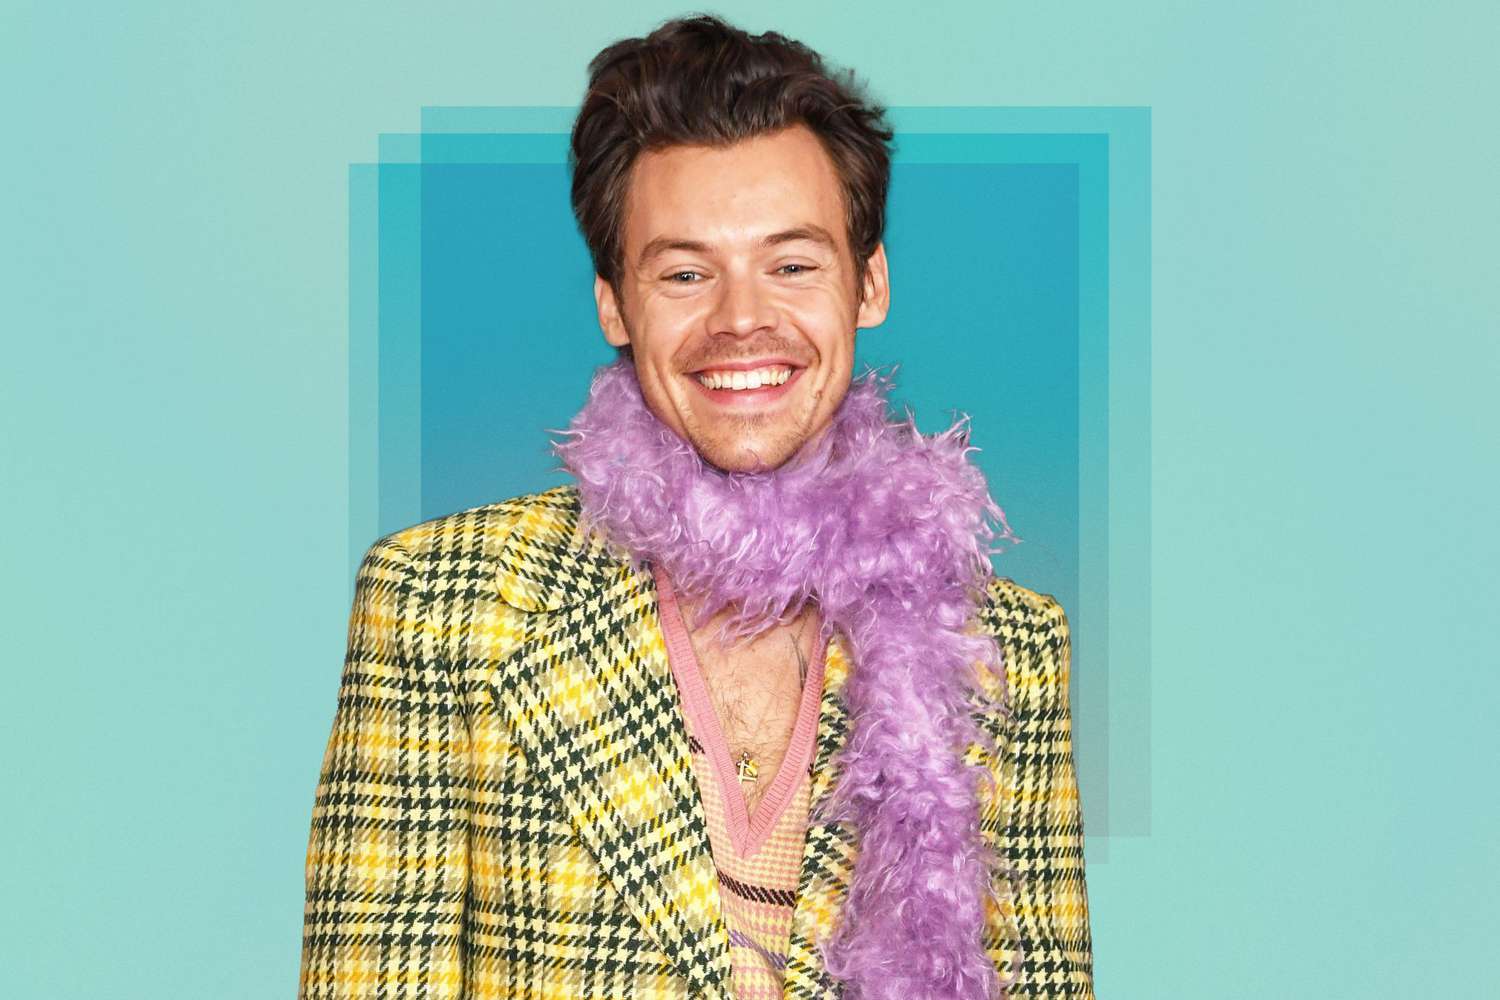 Harry Styles attends the 63rd Annual GRAMMY Awards wearing a yellow plaid blazer and purple scarf against a teal blue background